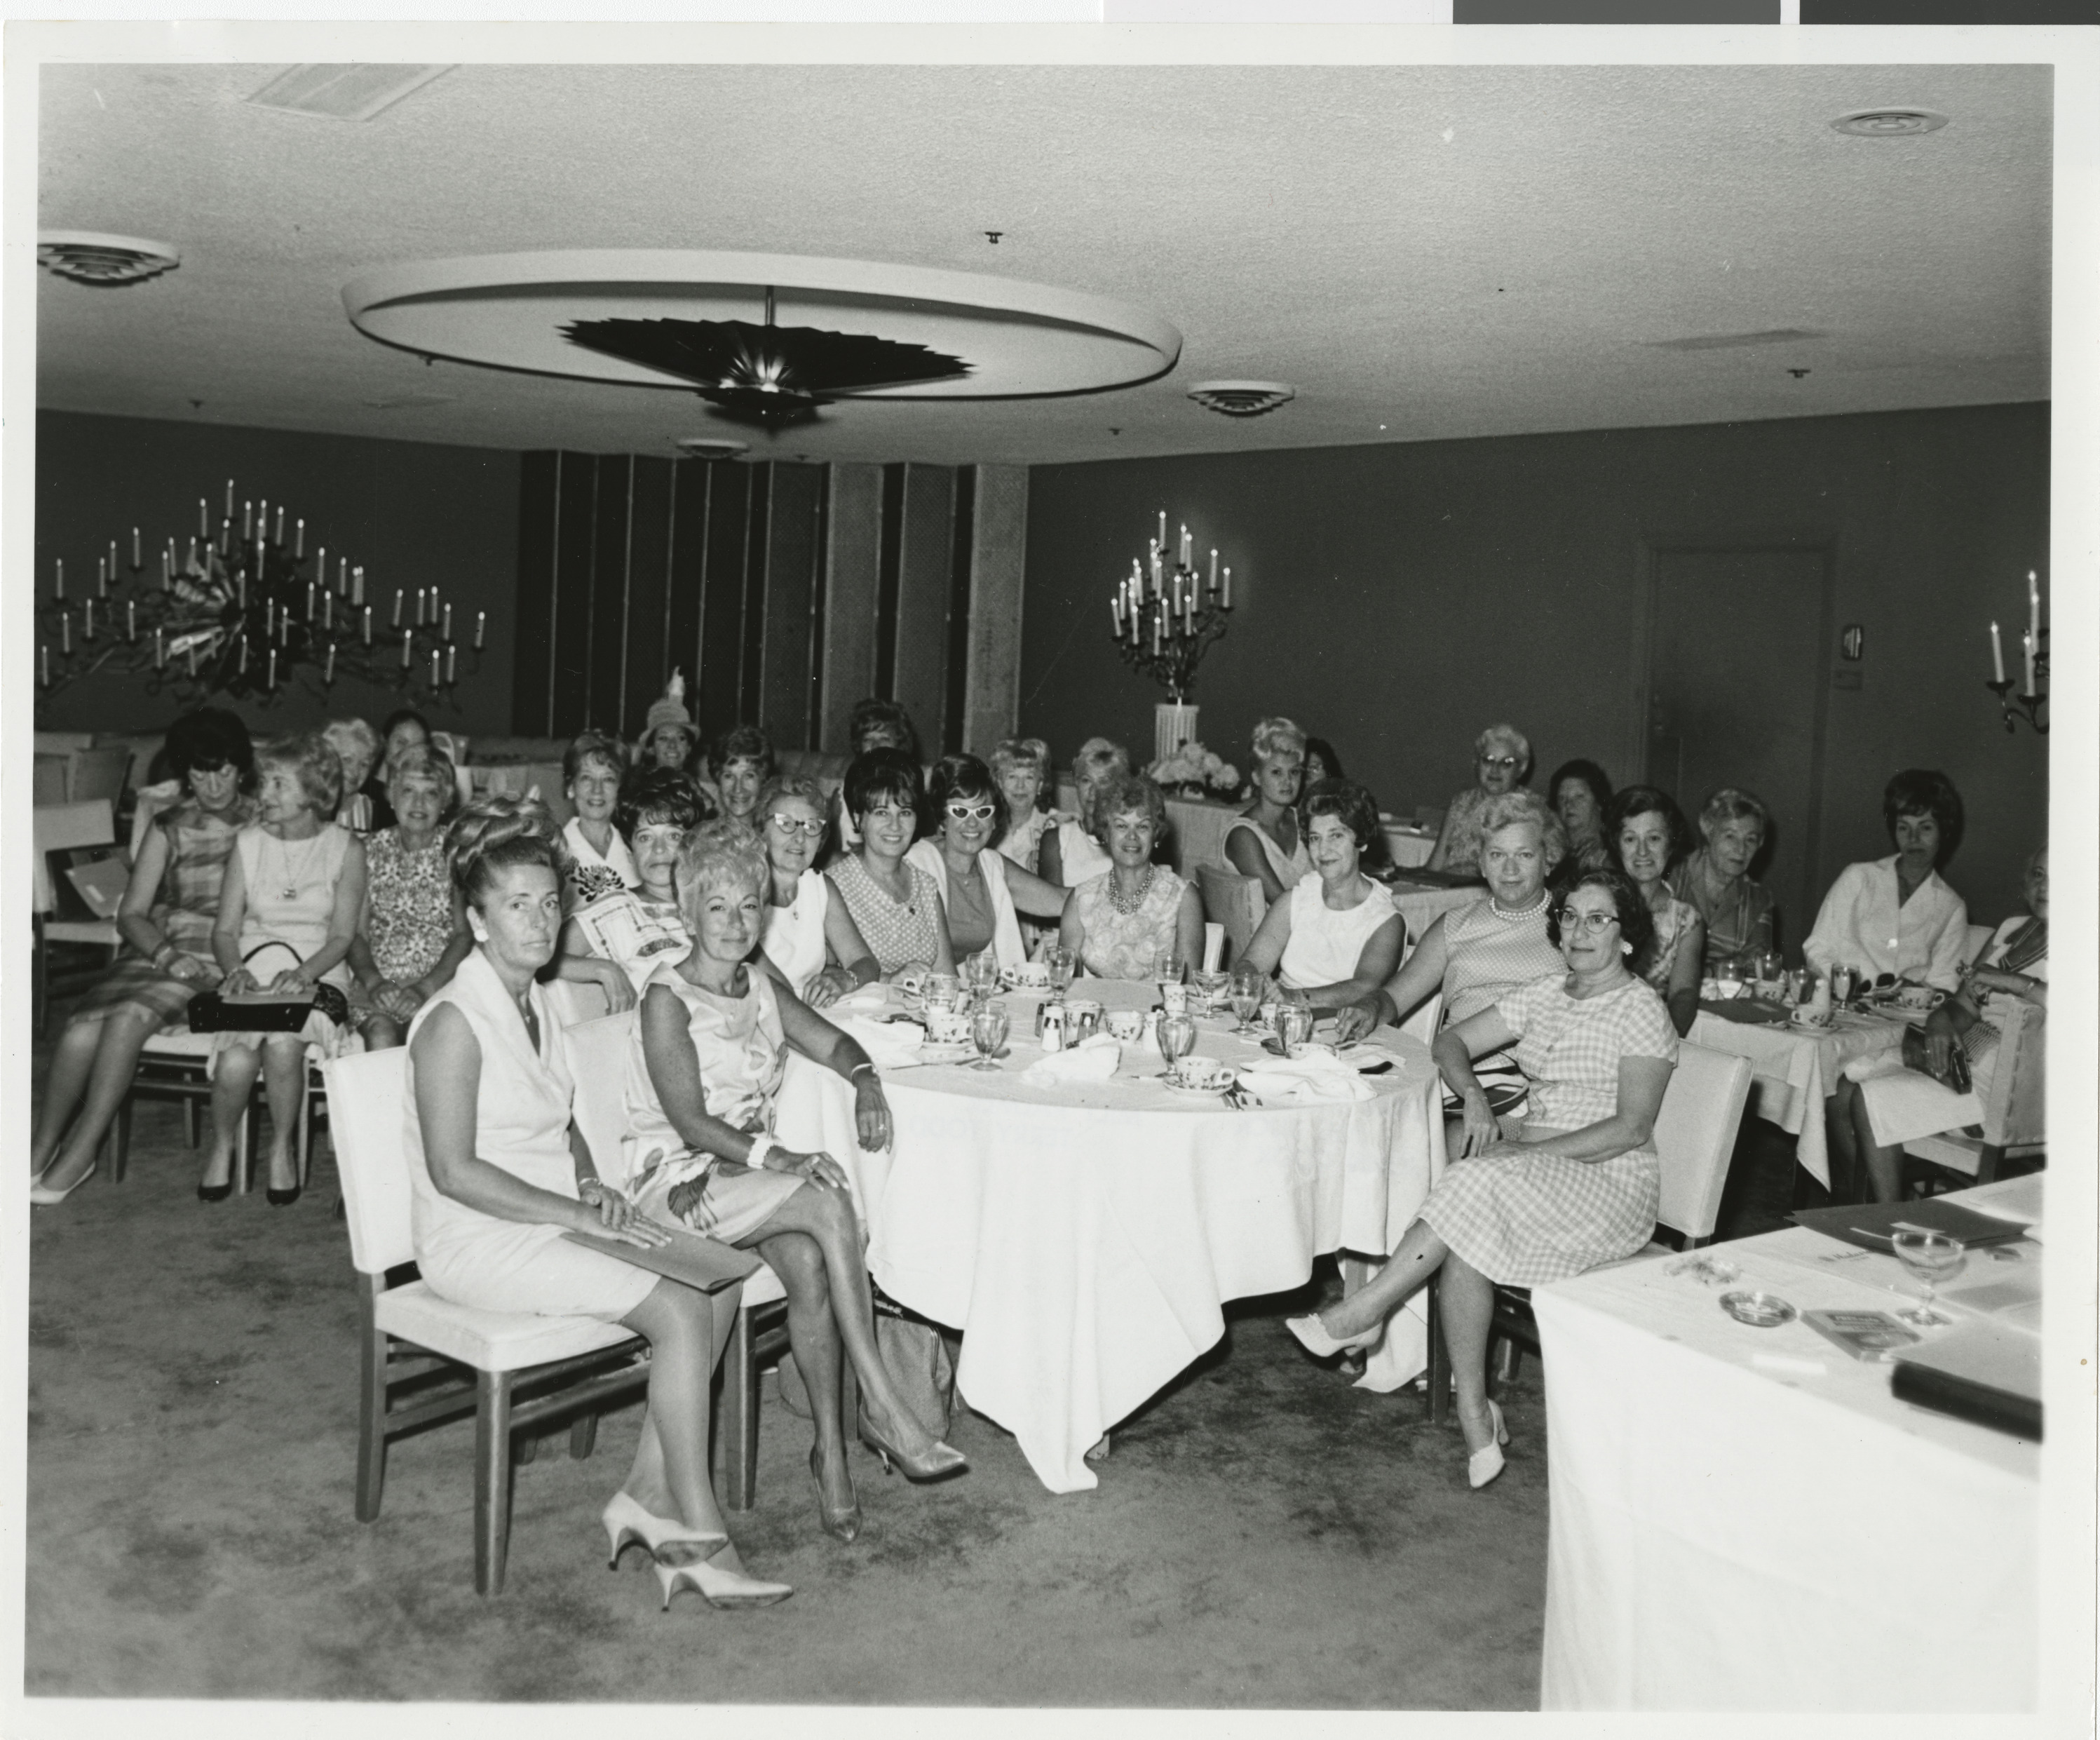 Photograph of Event, August 1966